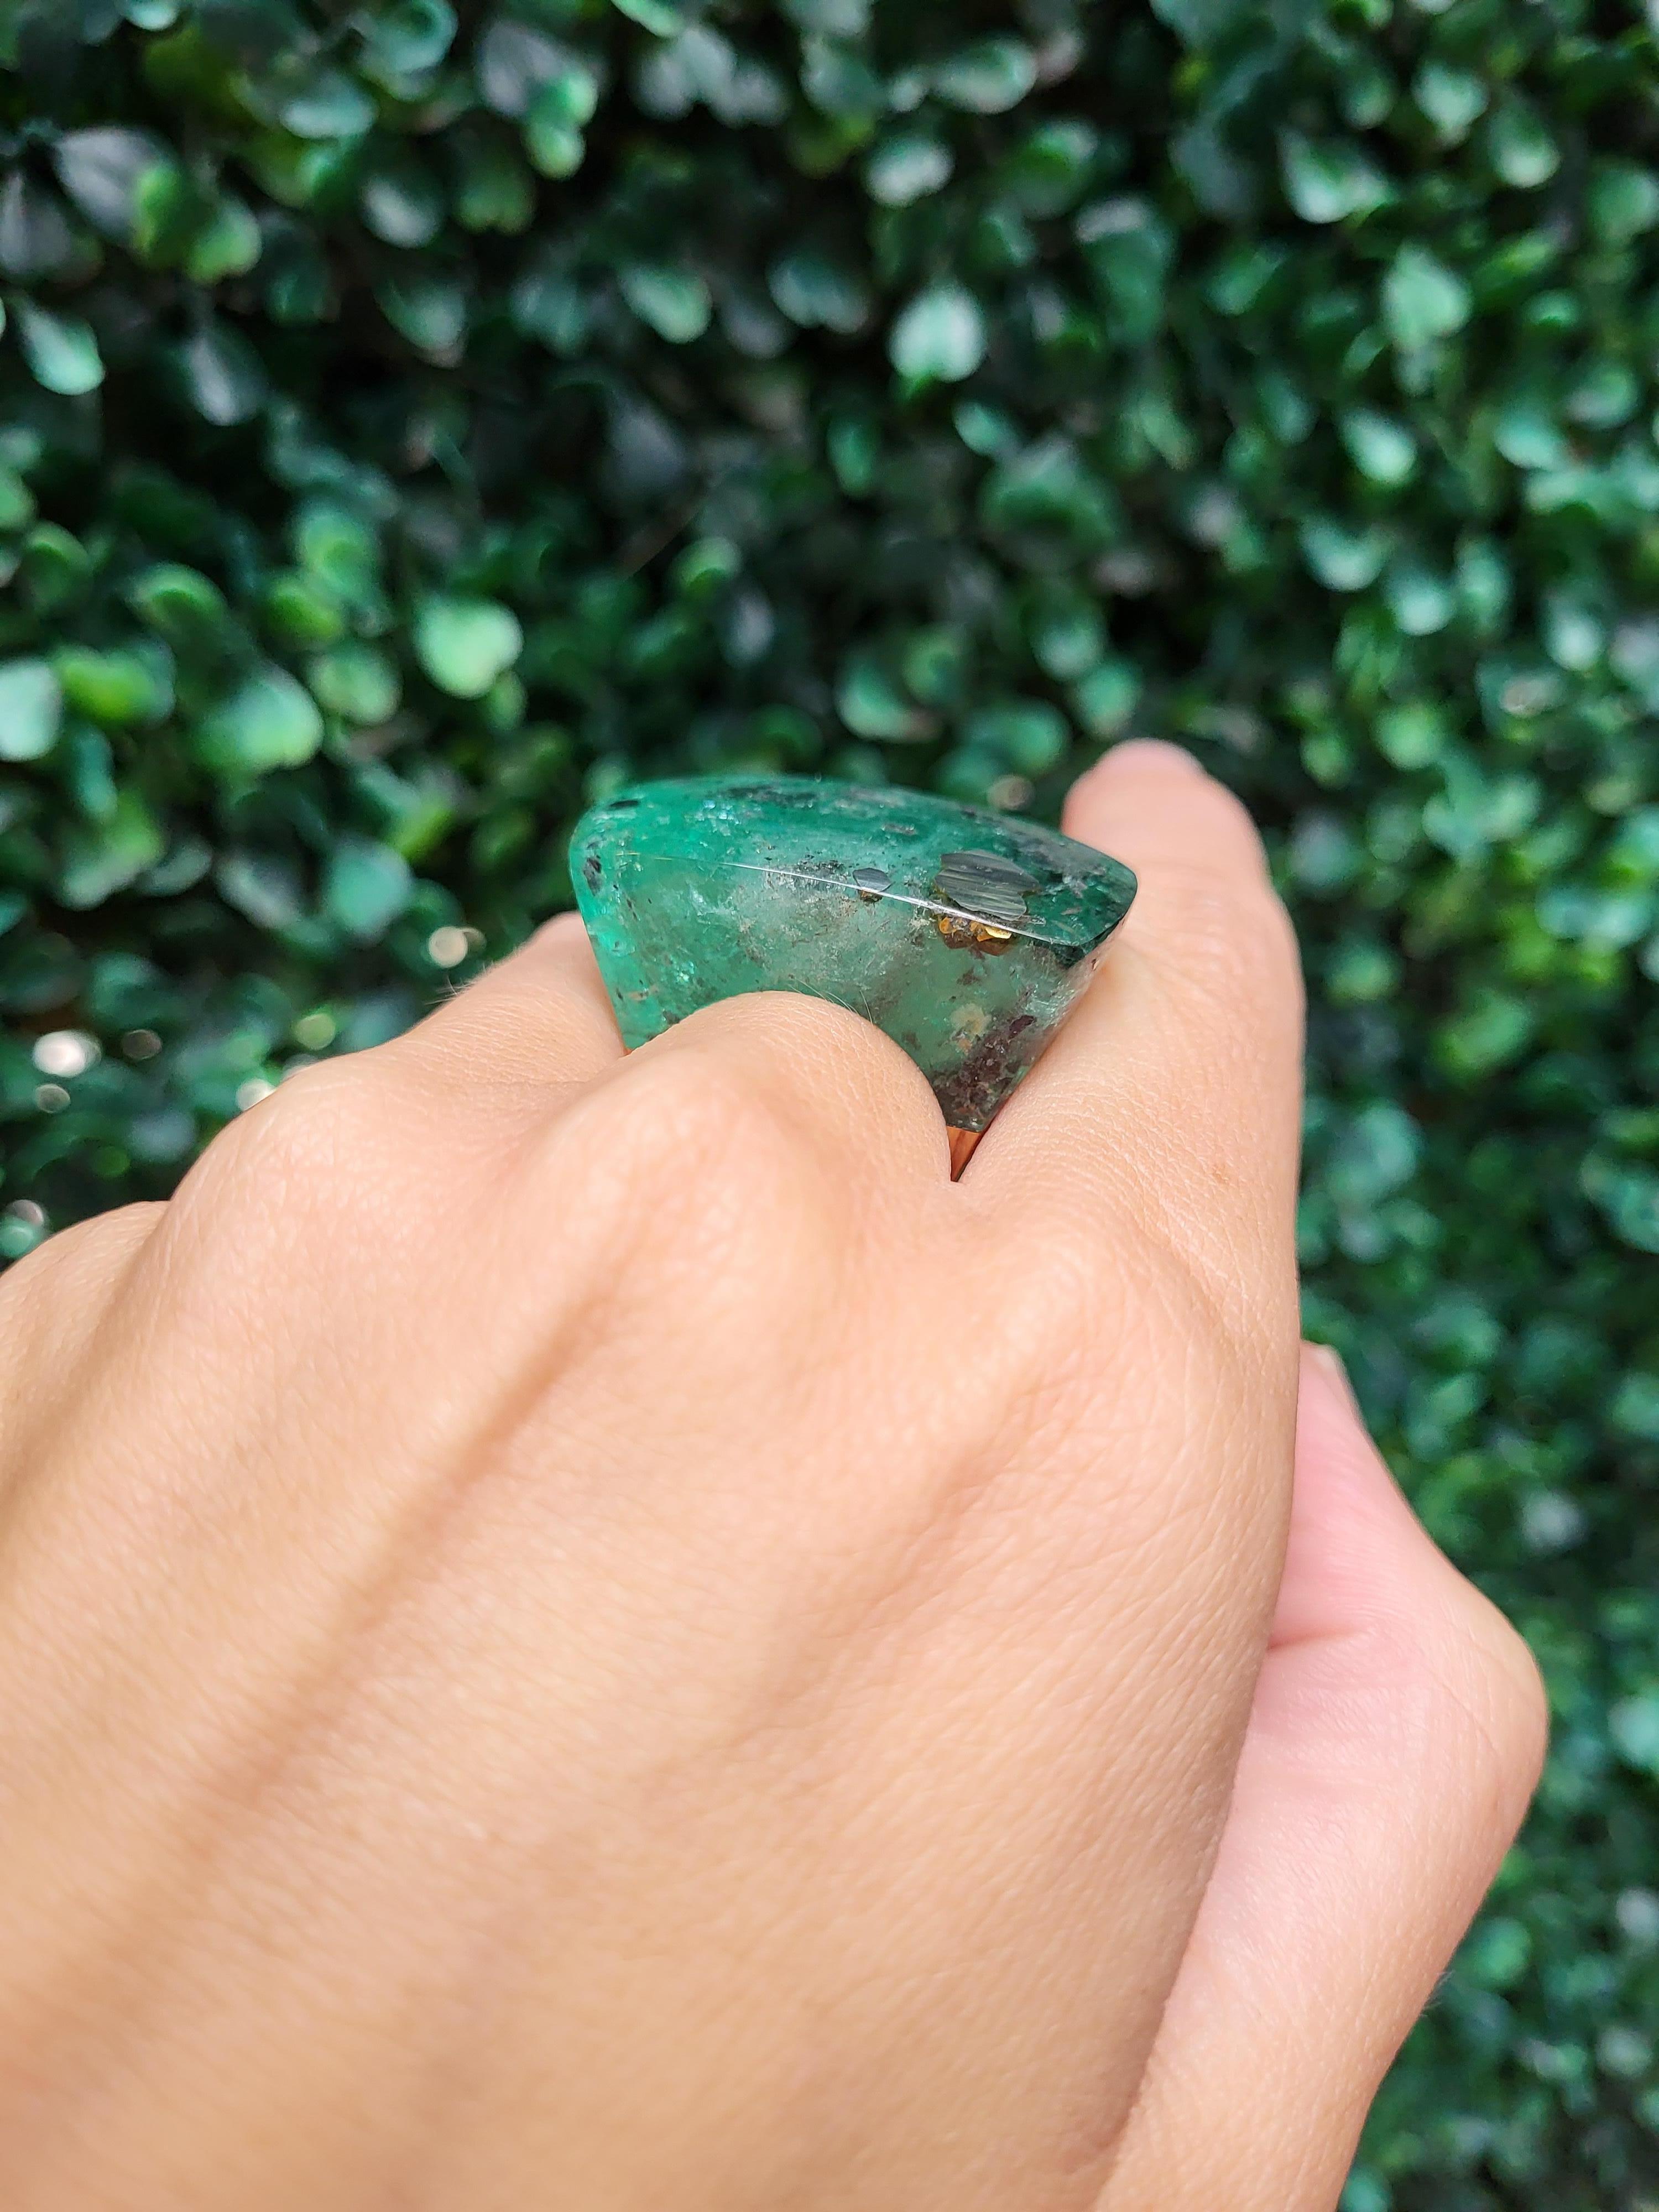 30 Carat Columbian Emerald Ring with Pyrite Inclusion For Sale 2